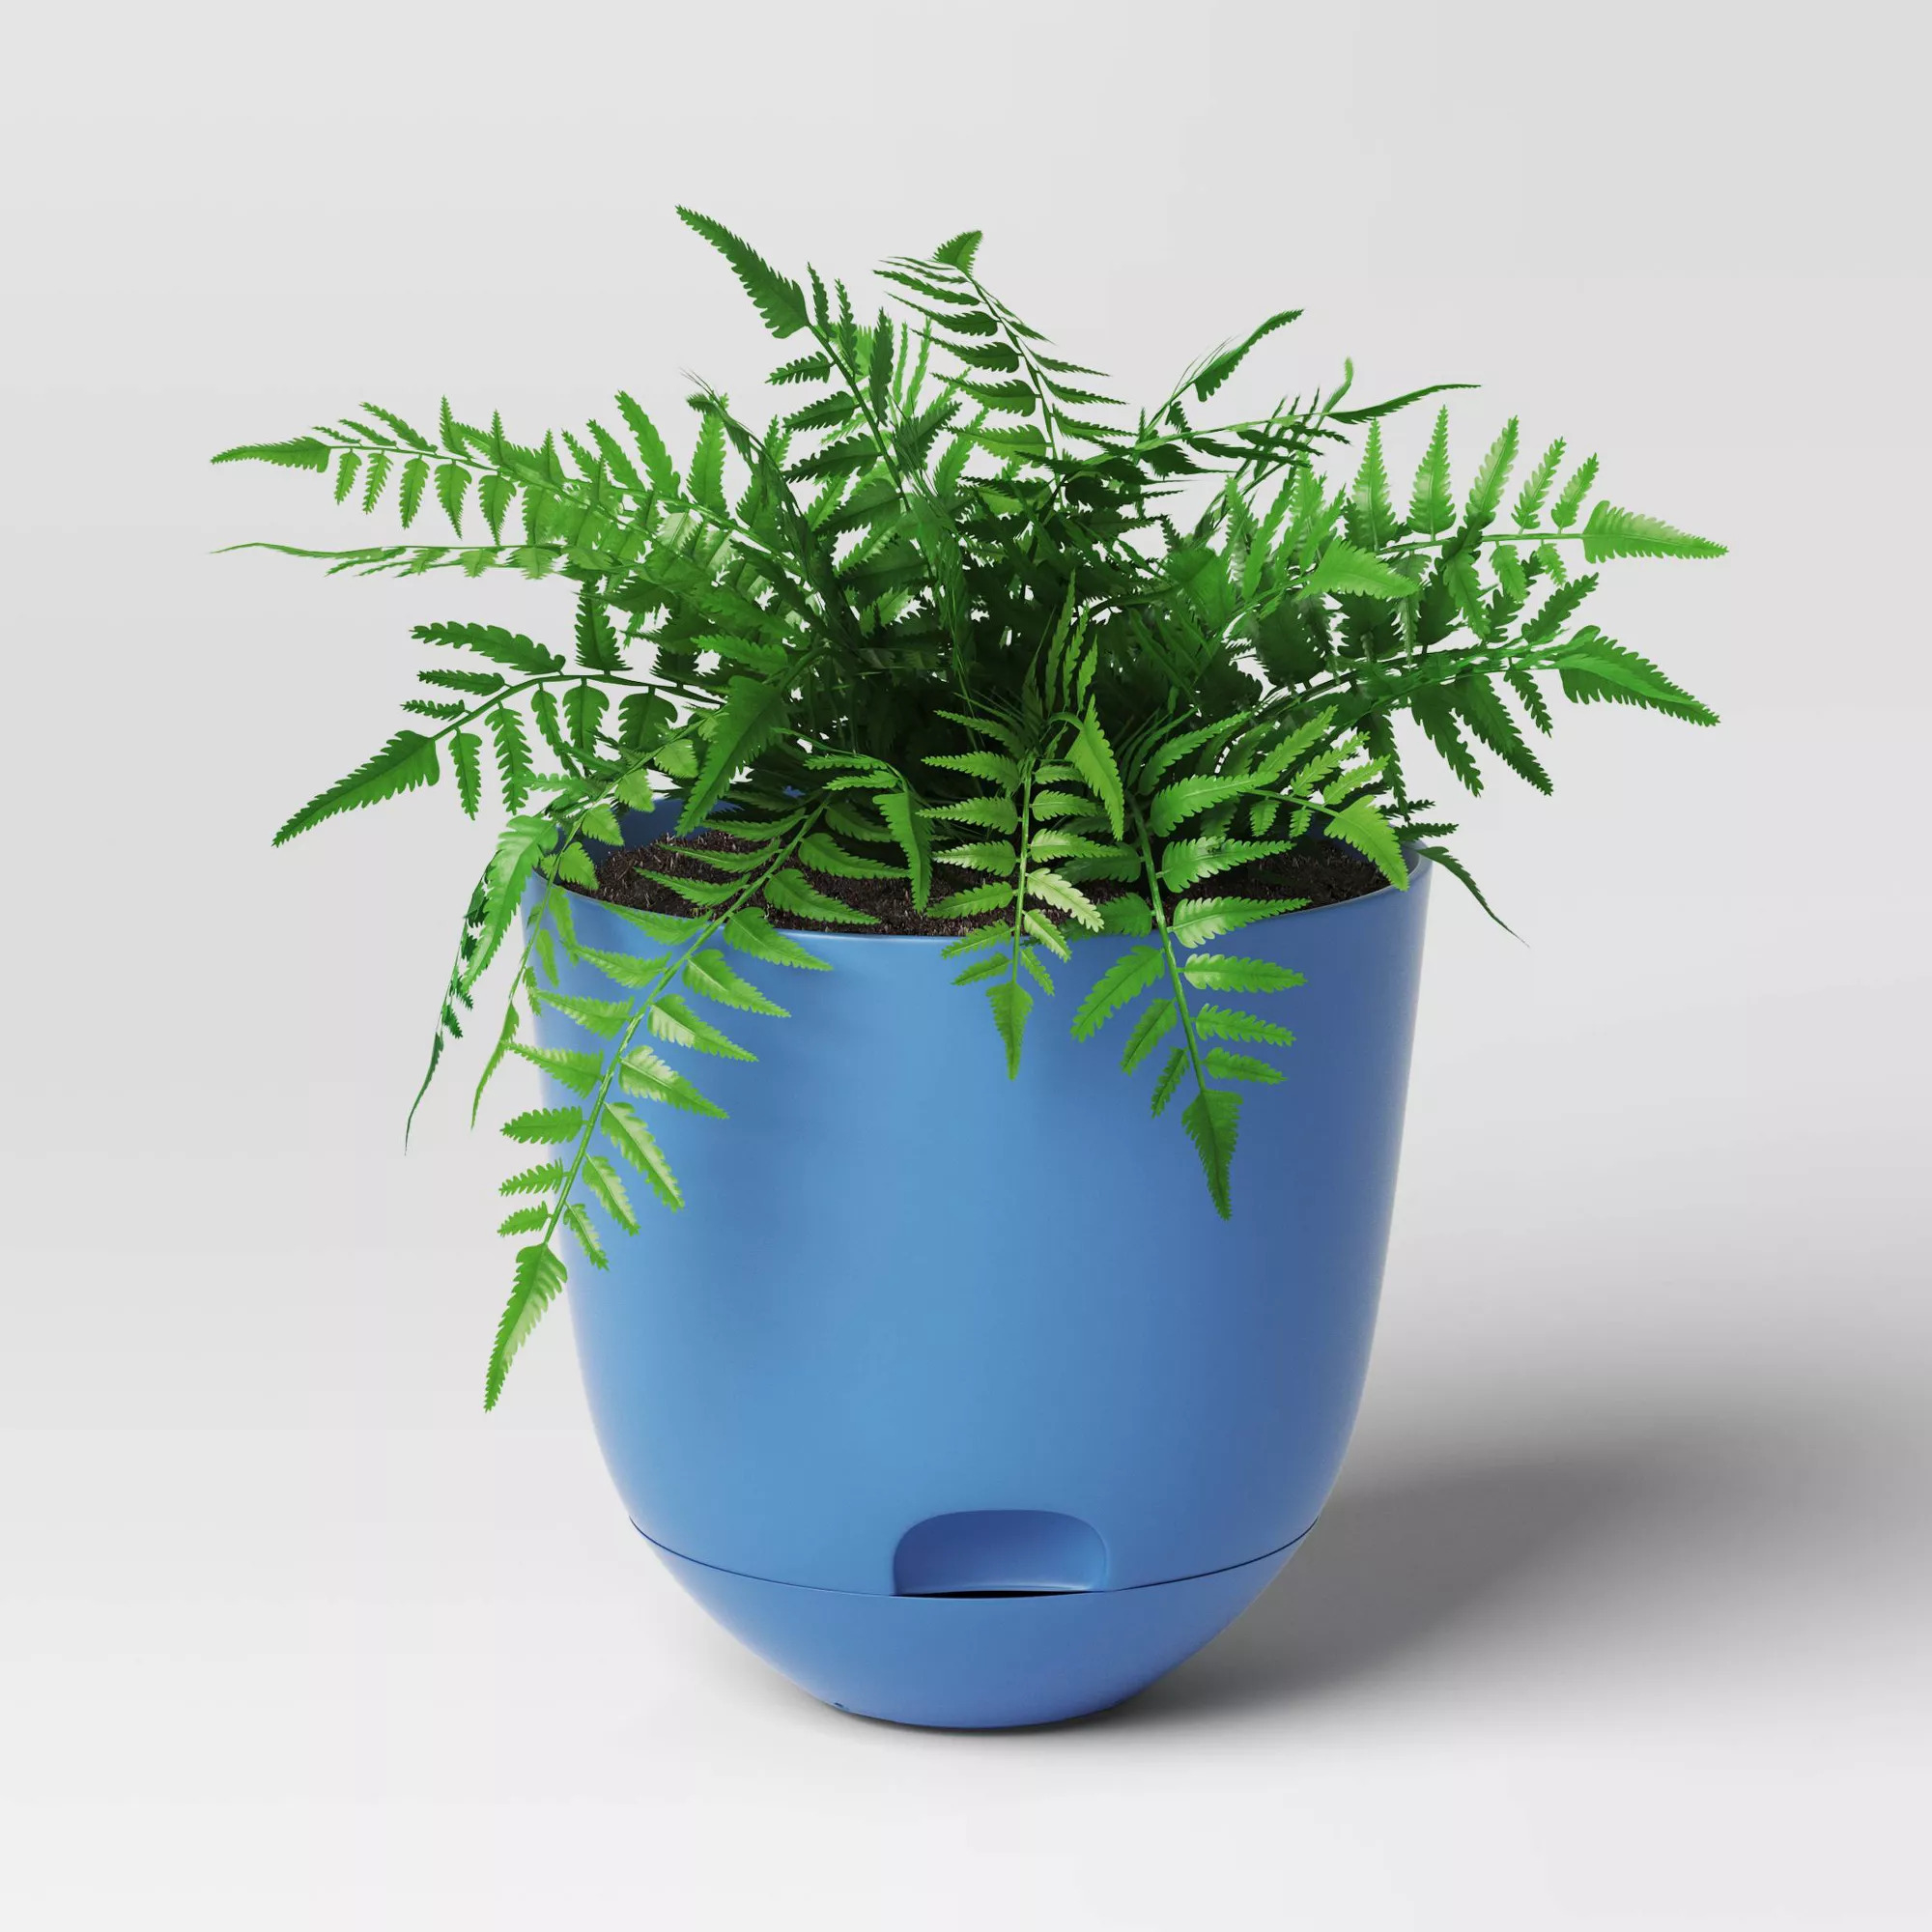 Fern in blue self-watering planter with visible water level indicator